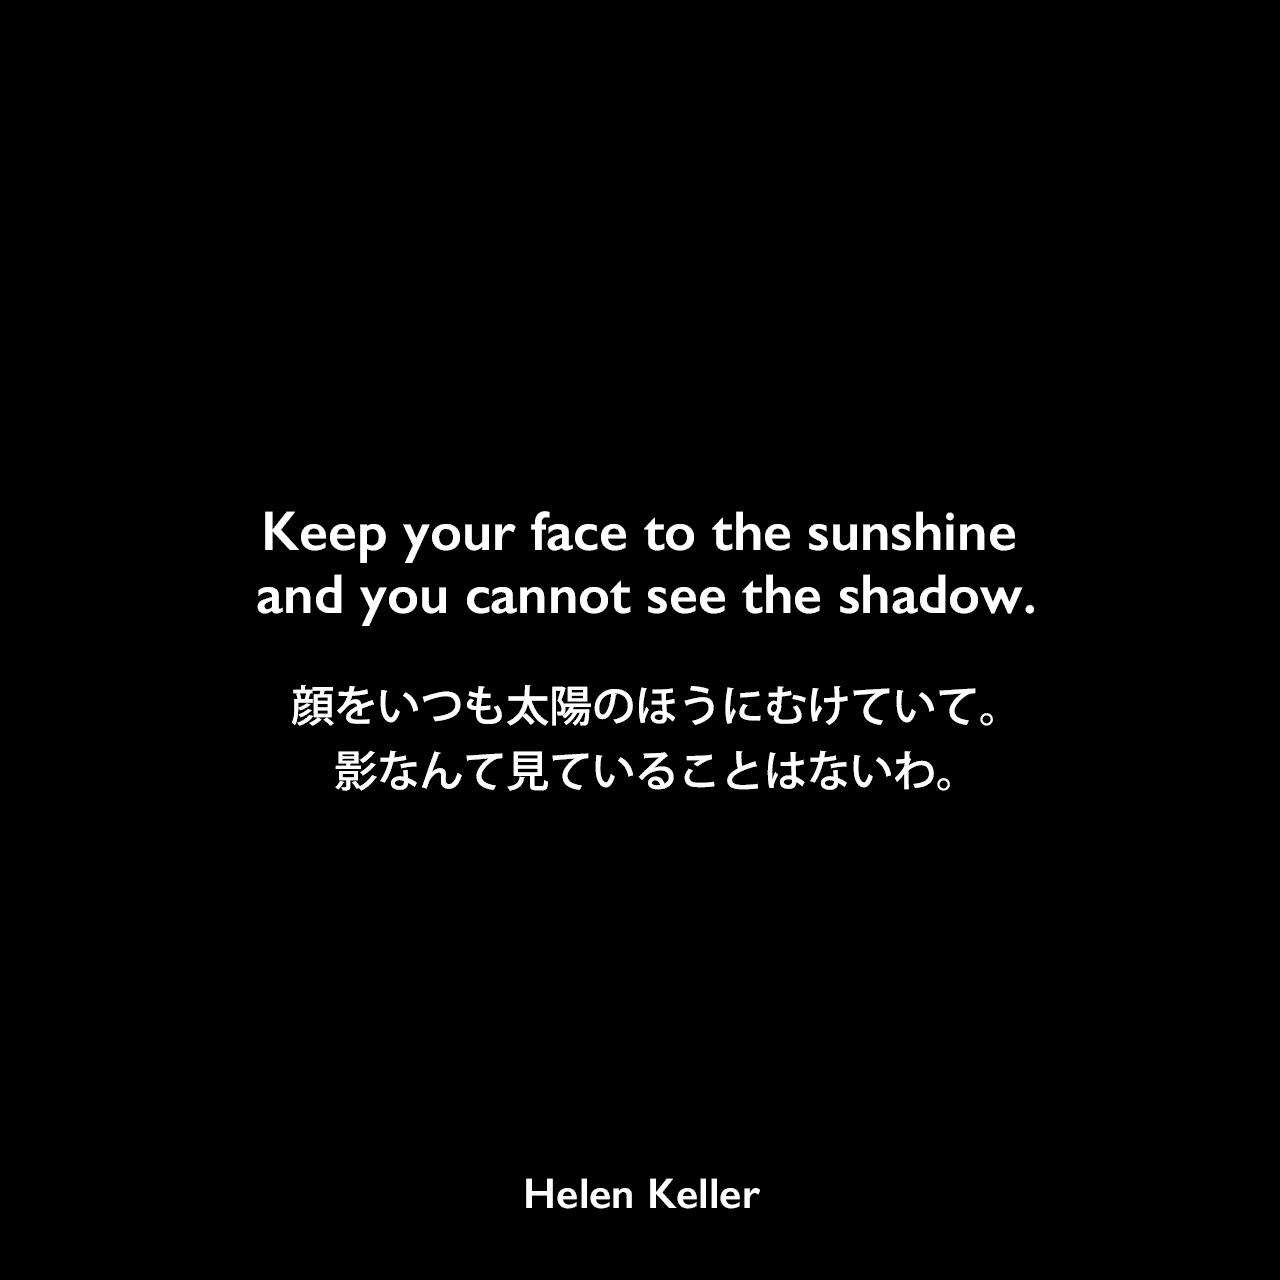 Keep your face to the sunshine and you cannot see the shadow.顔をいつも太陽のほうにむけていて。影なんて見ていることはないわ。Helen Keller